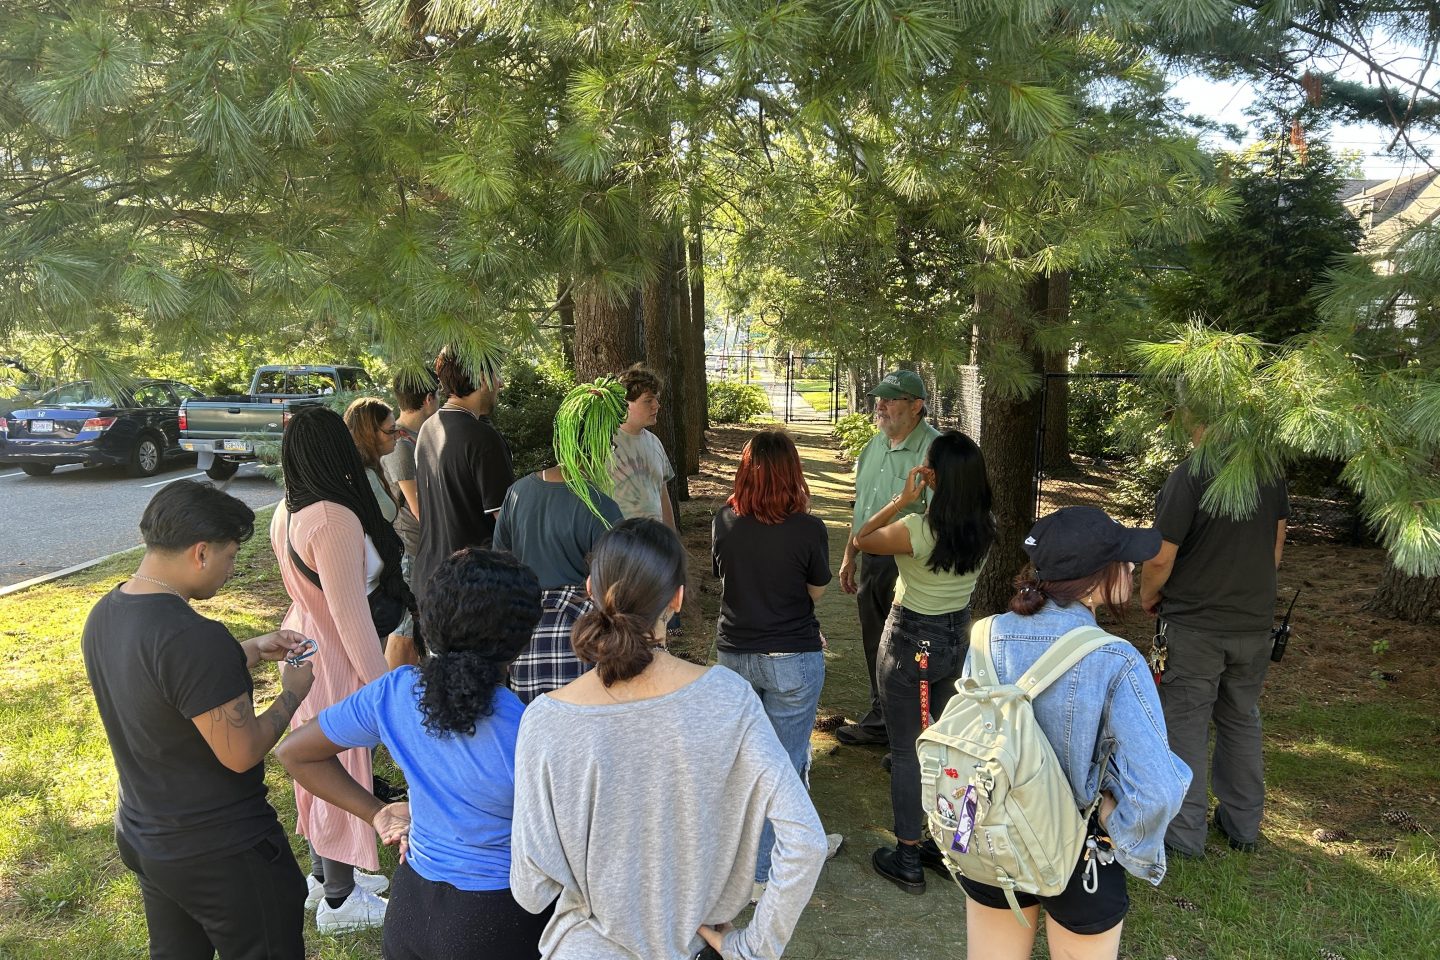 Robert Conaghan, Associate Director of Facilities, gave our LLC students a tour of our campus Arboretum. Students placed their kindness rocks with positive messages during the tour.